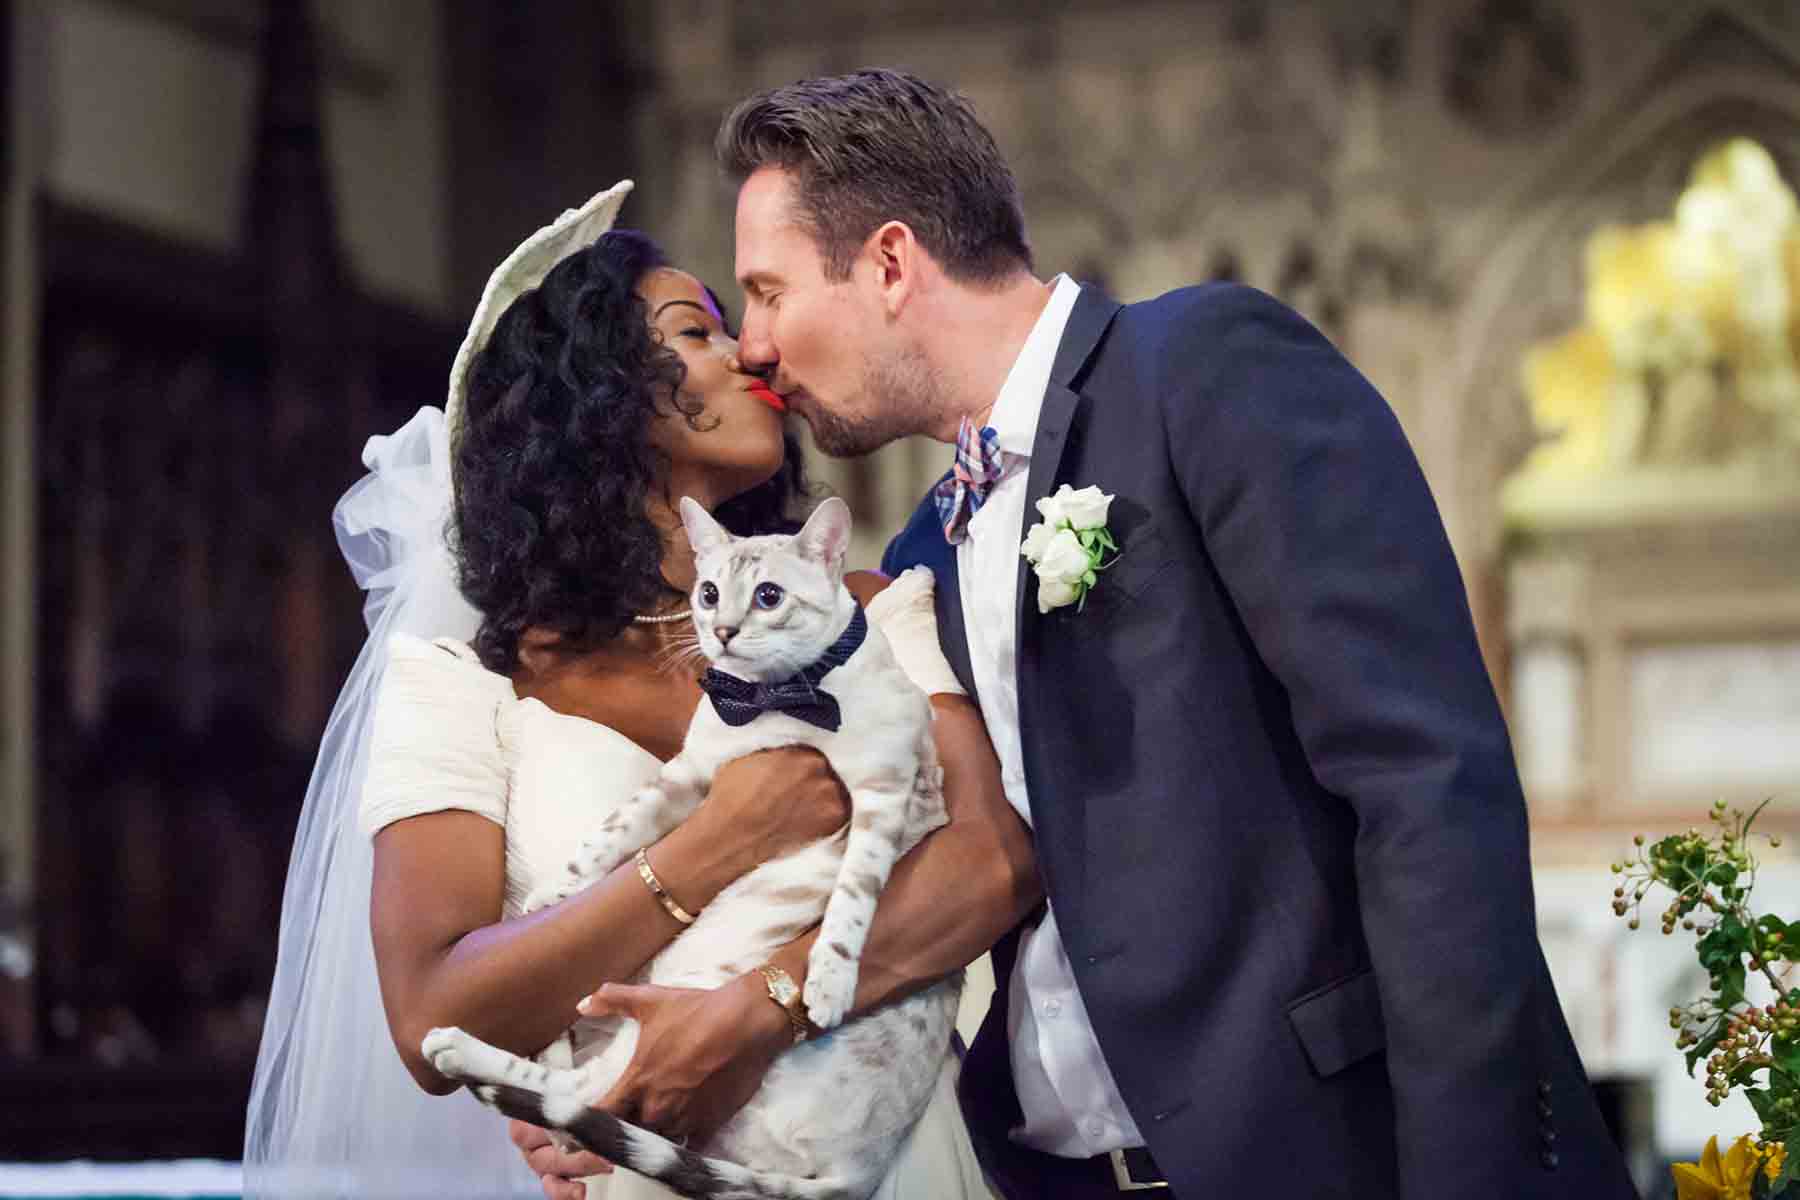 Bride and groom kissing while bride holds cat in church for an article on the best wedding jobs for family and friends